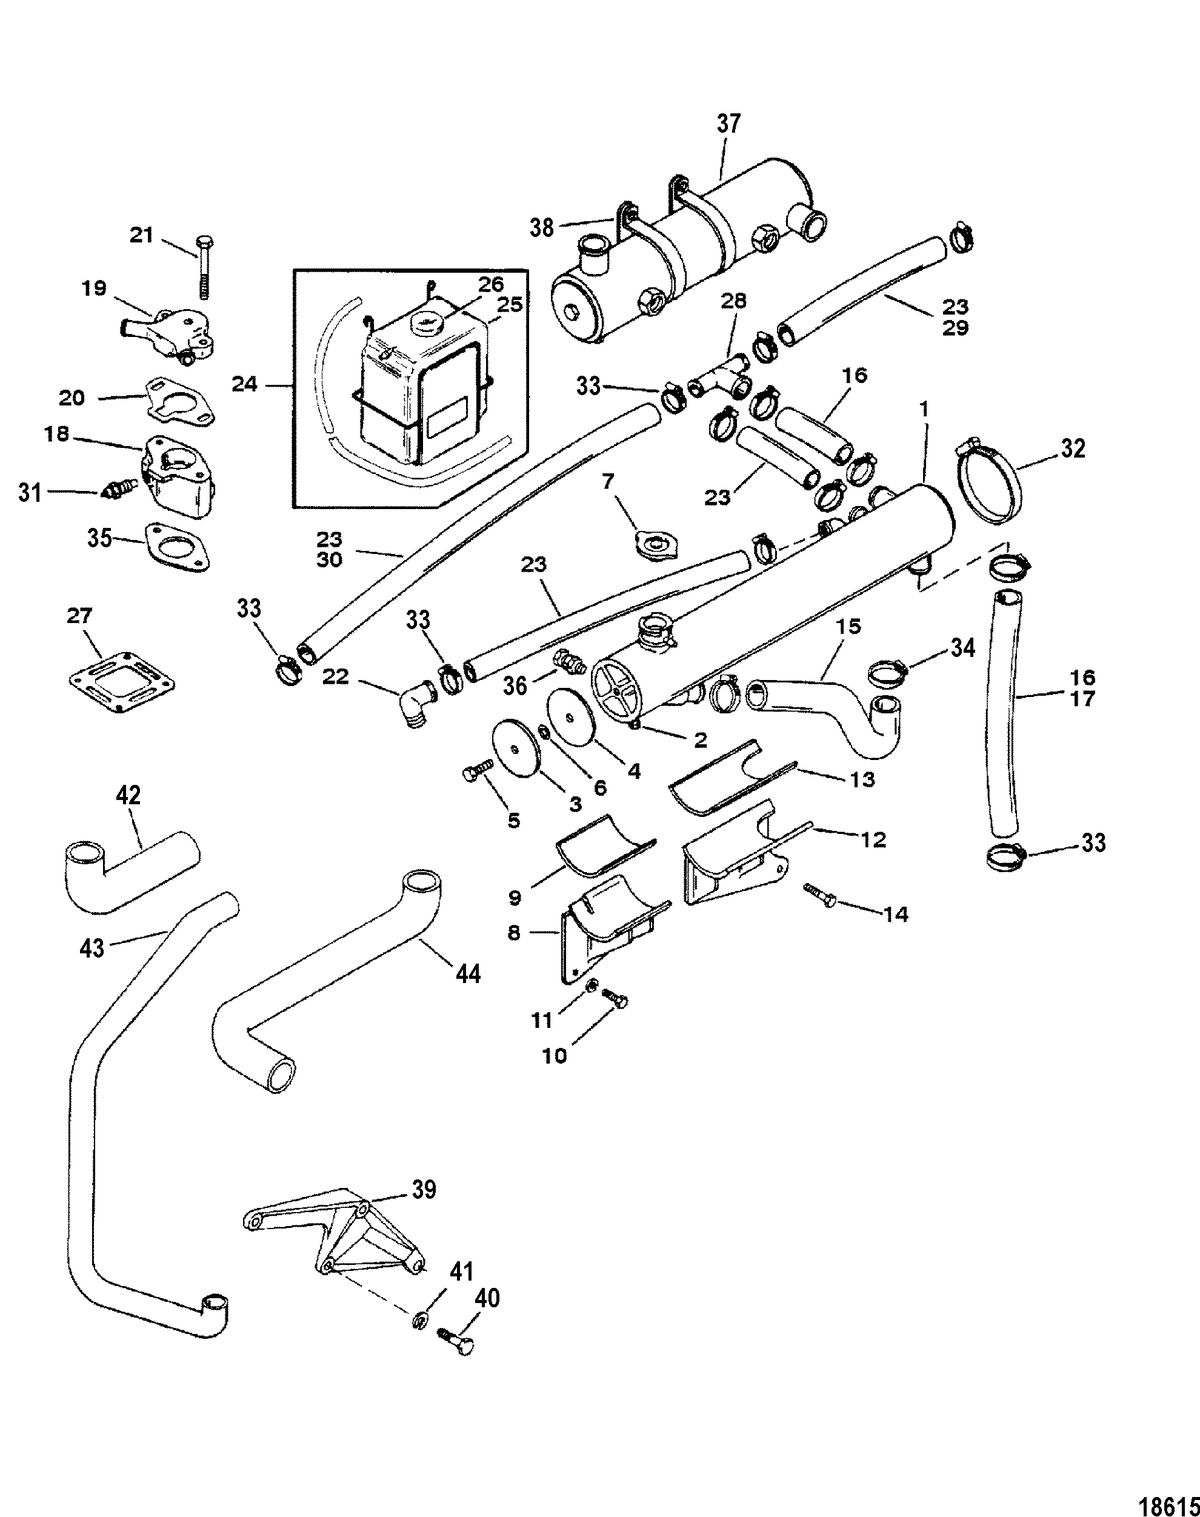 ACCESSORIES EXHAUST/COOLING SYSTEMS AND EXTENSION KITS Closed Cooling System(18390A6 / A8)